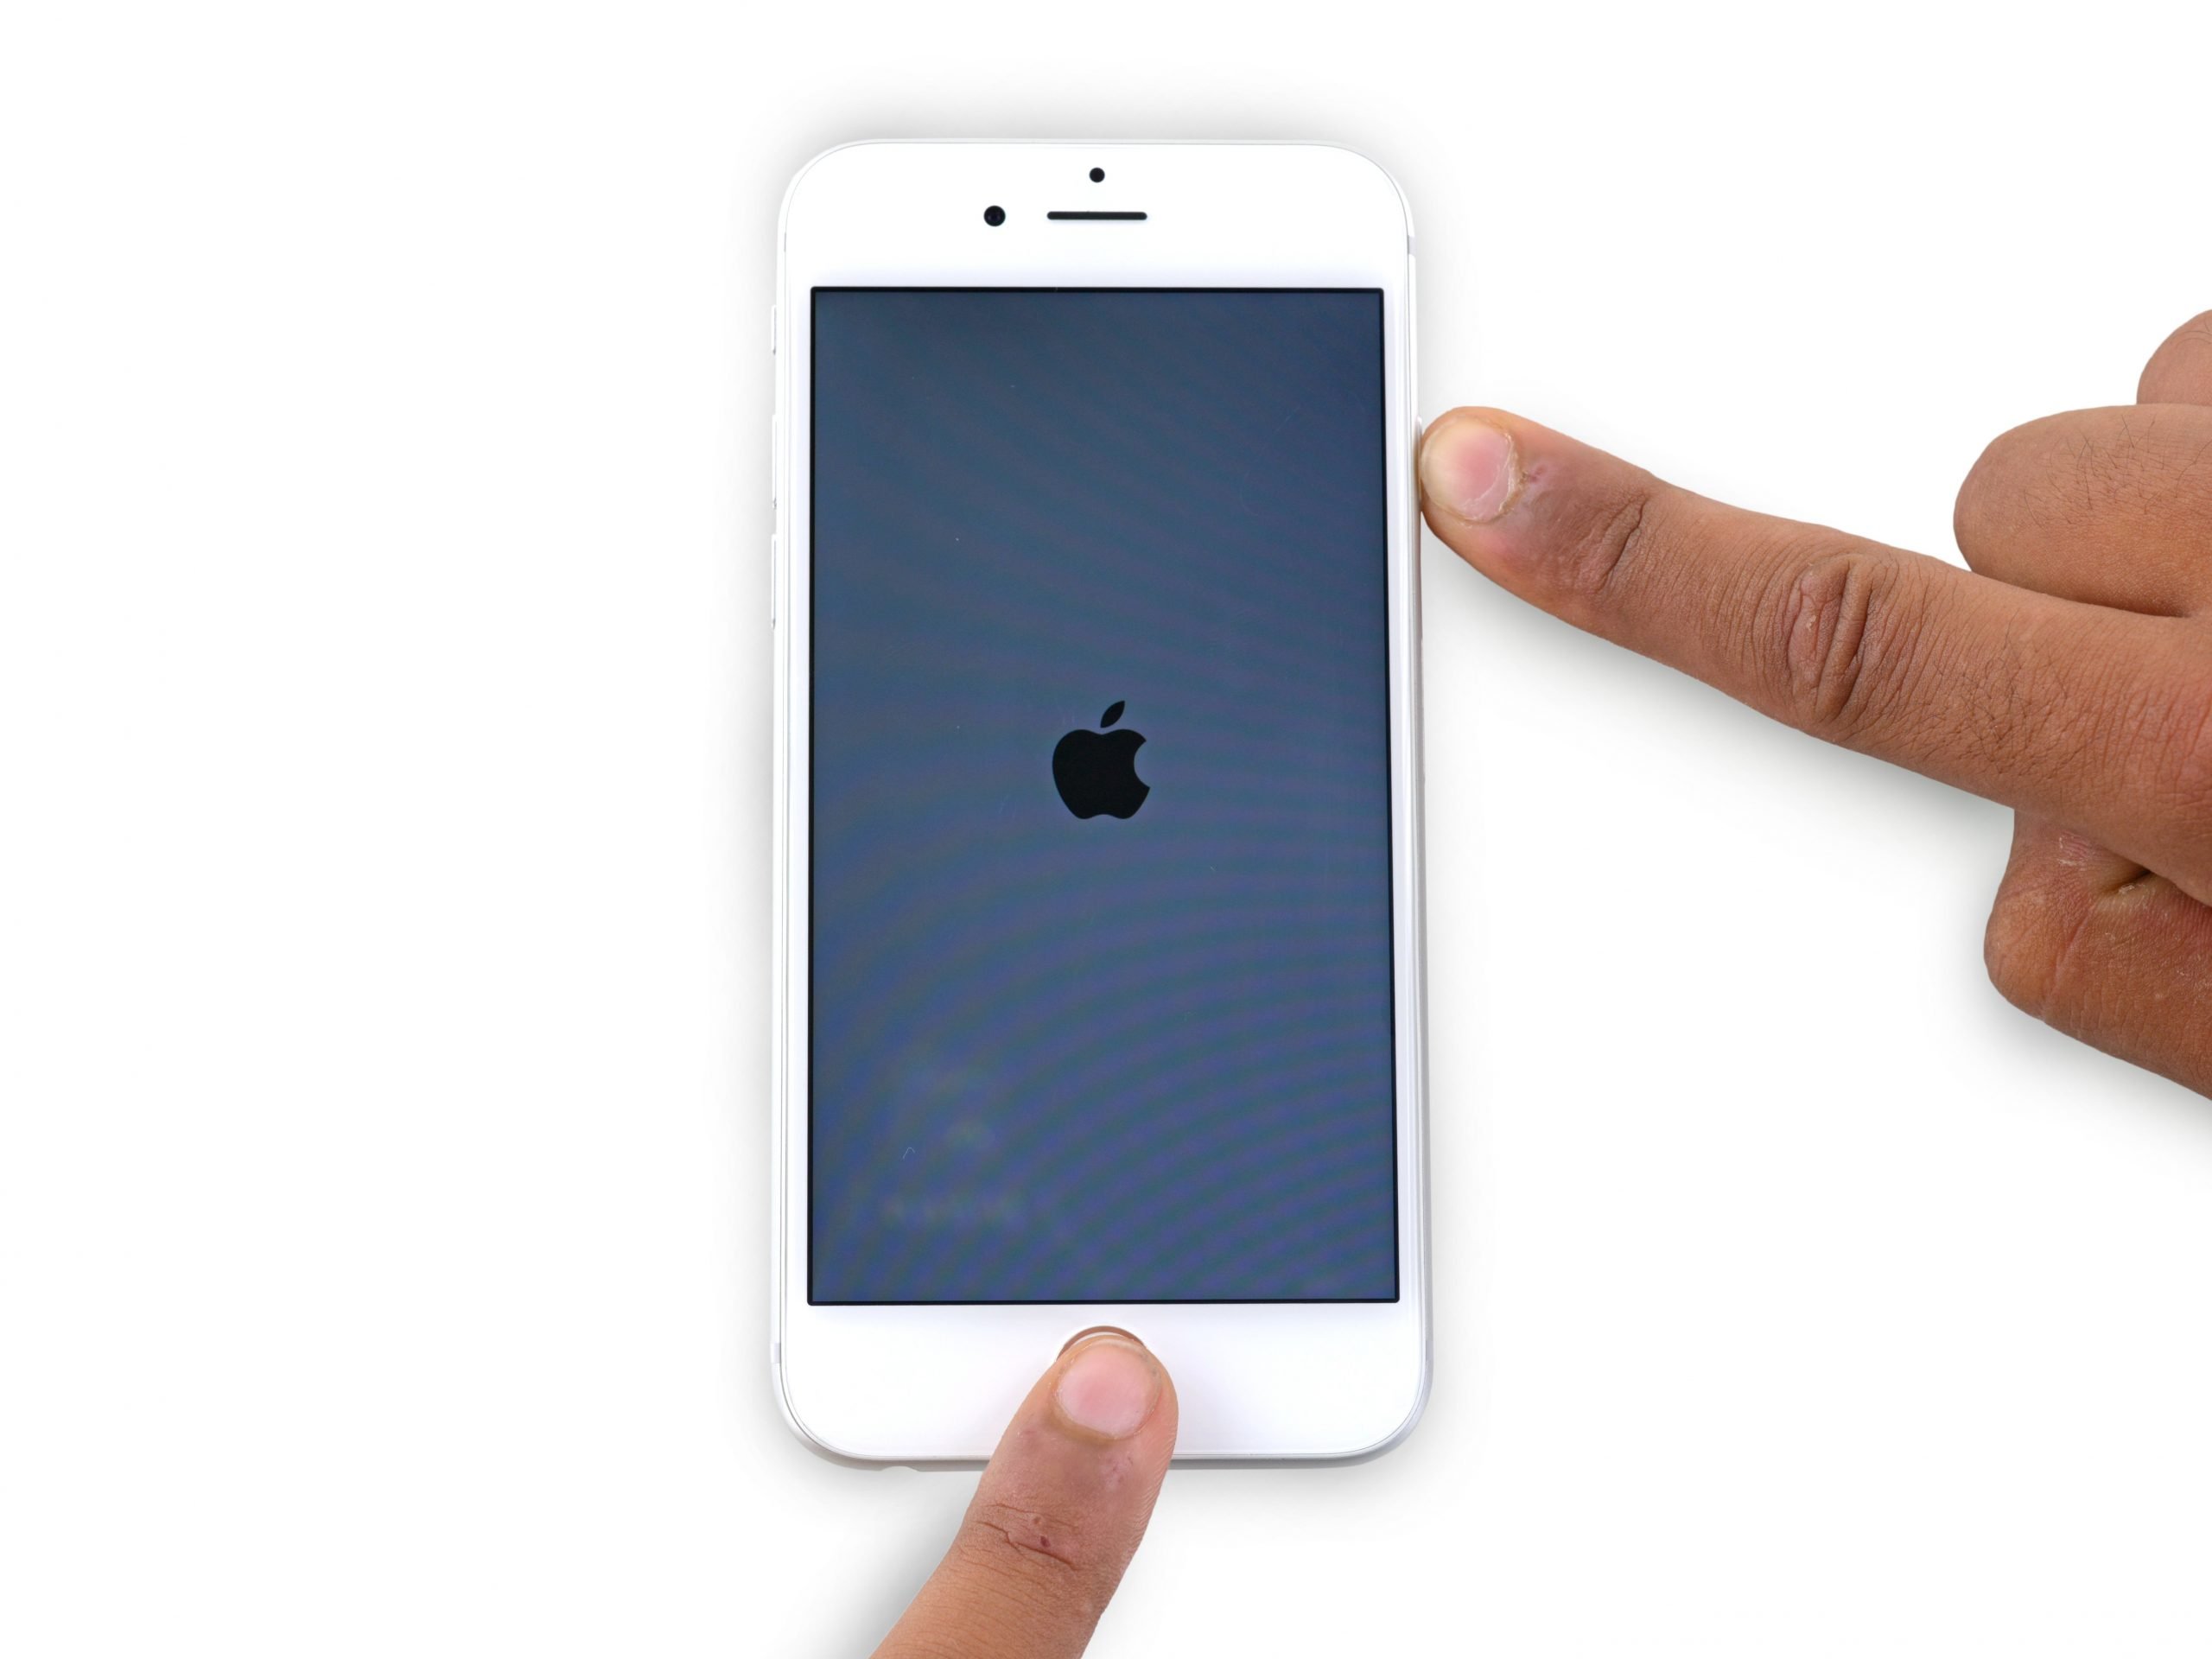 How to Force Restart an iPhone 6